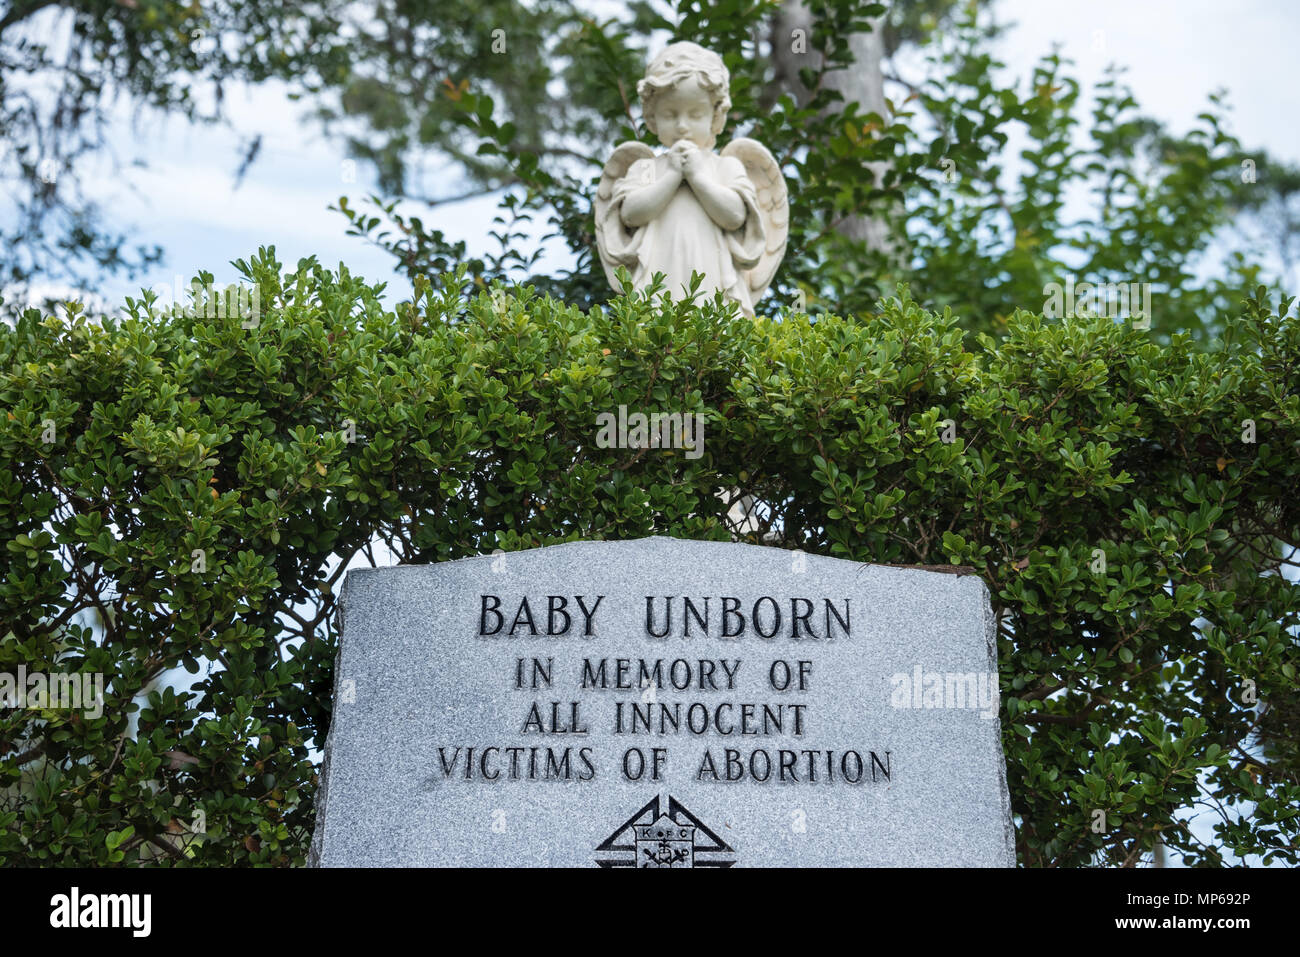 Memorial headstone marker at Nombre de Dios Mission in St. Augustine, Florida to "Baby Unborn" in memory of all innocent victims of abortion. Stock Photo